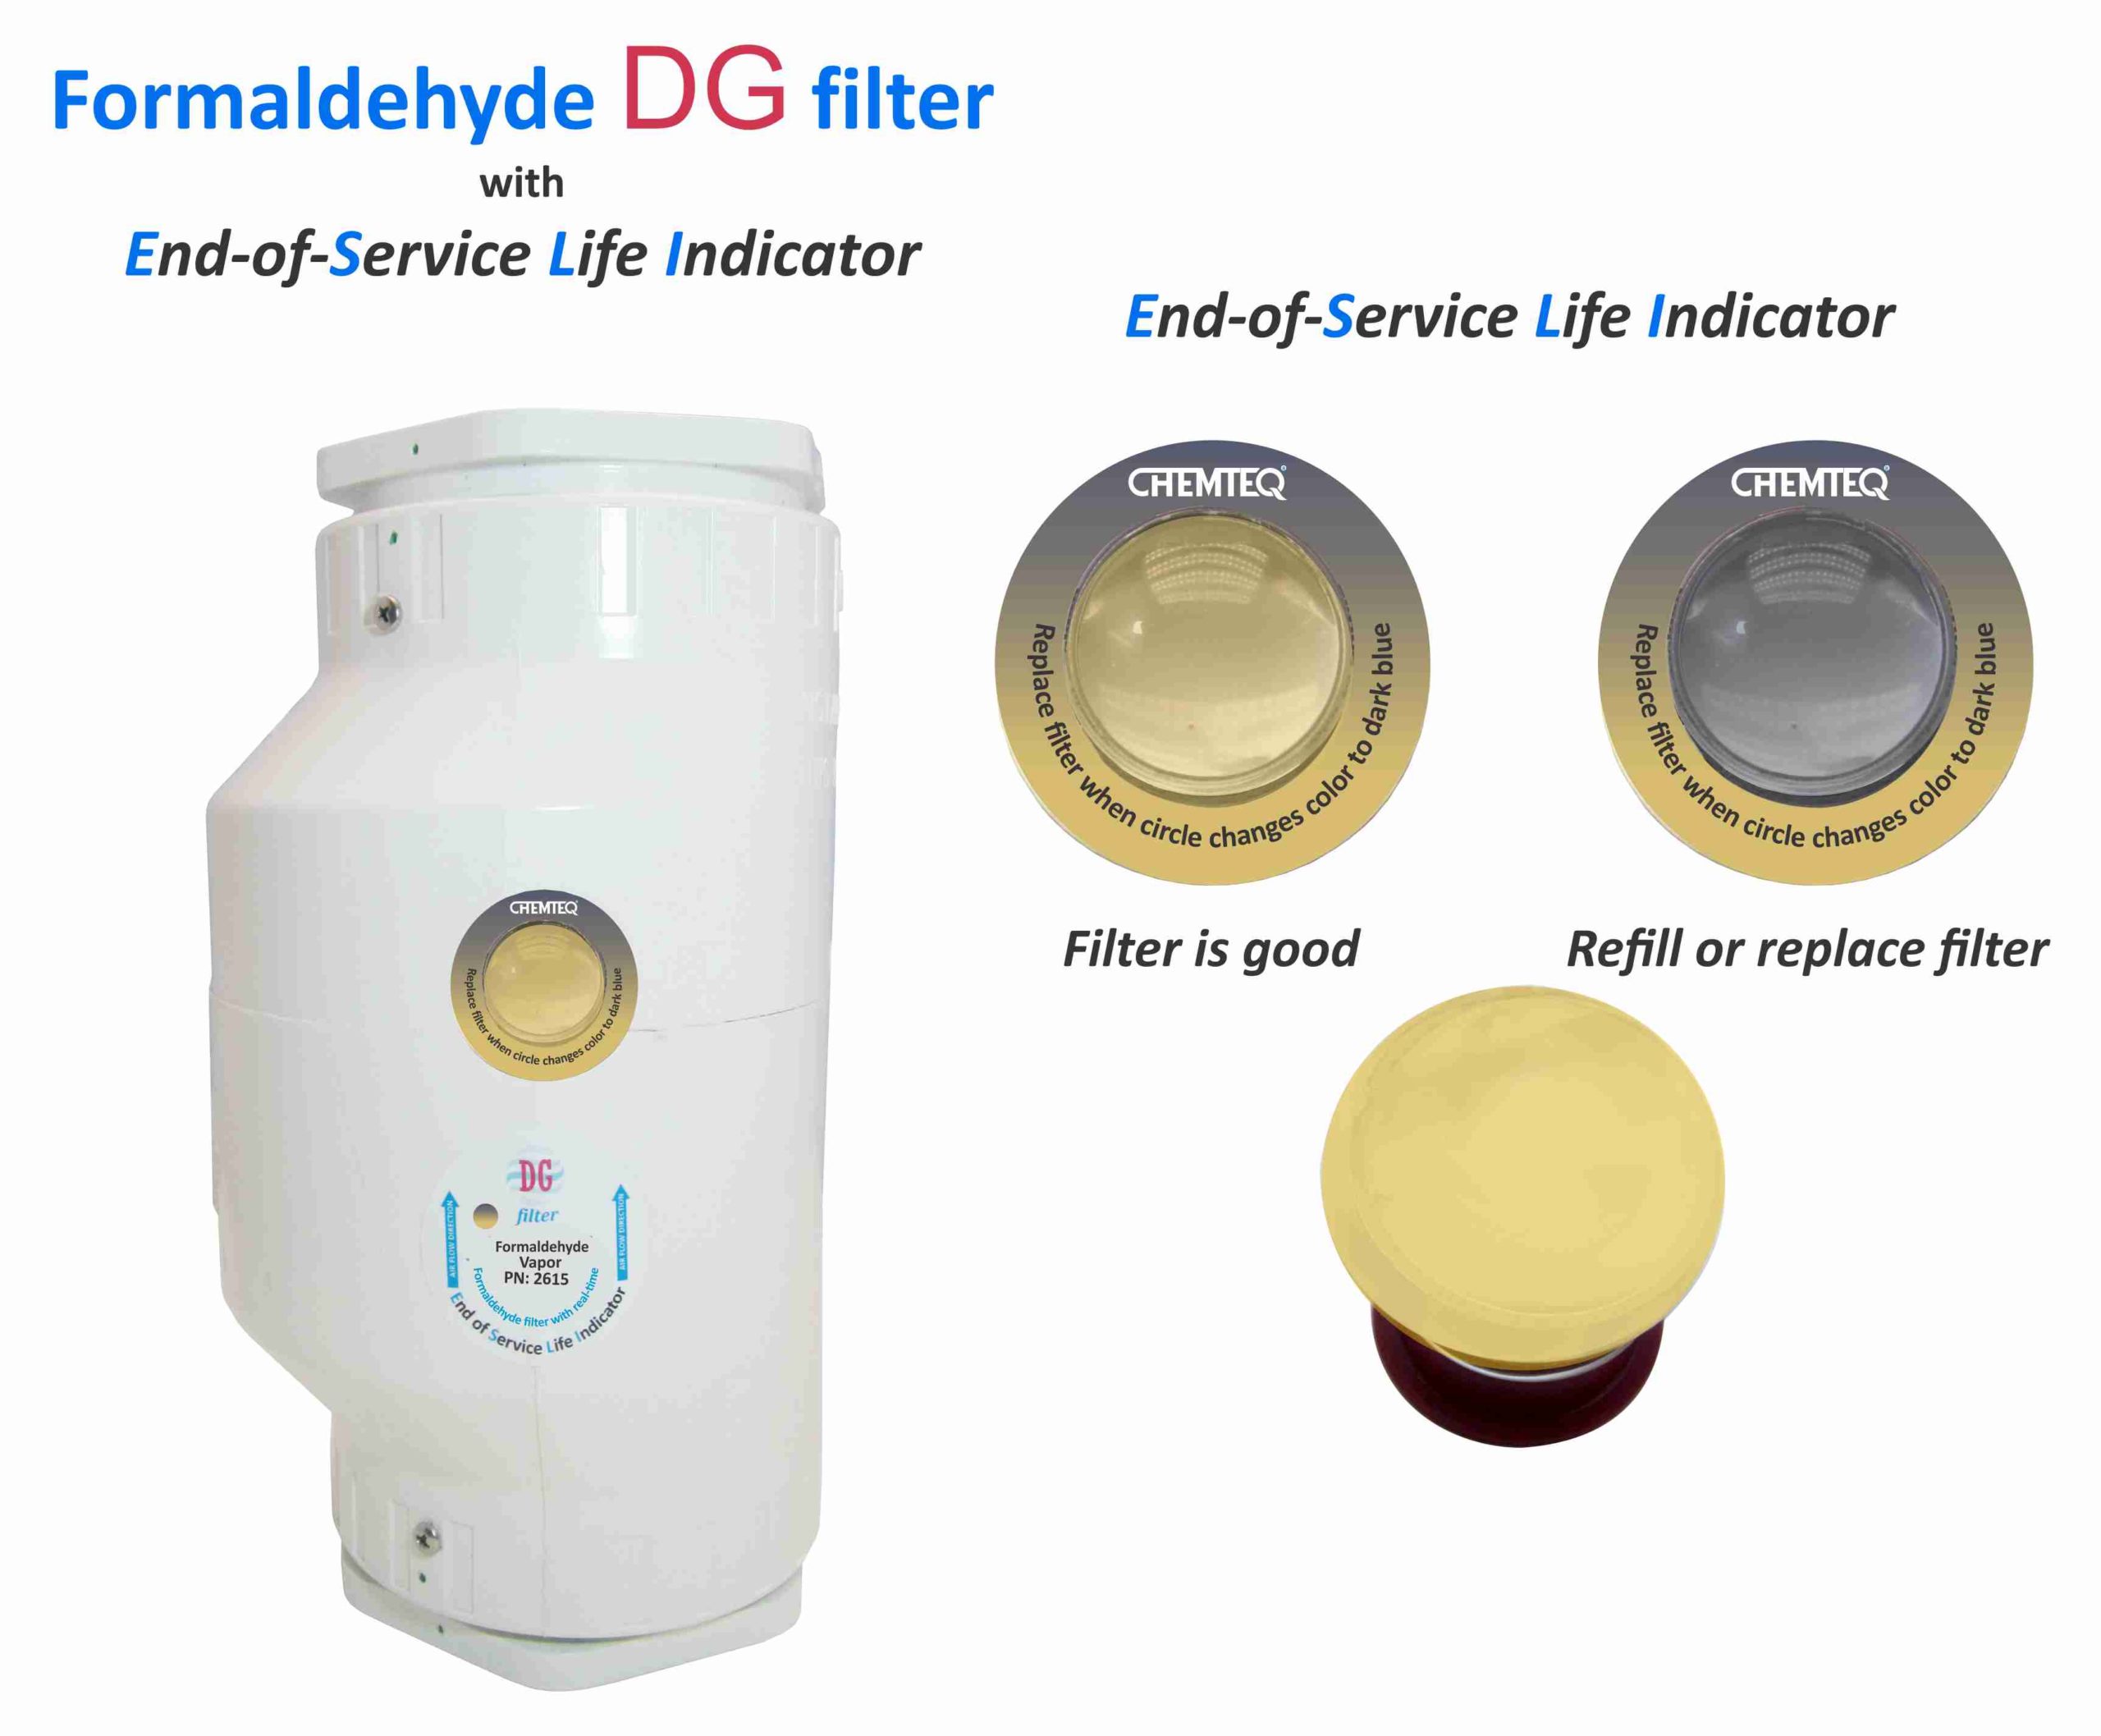 Formaldehyde DG FILTER-ESLI-2615. Filter with end of service life indicator for chemical processes and reactor vents.